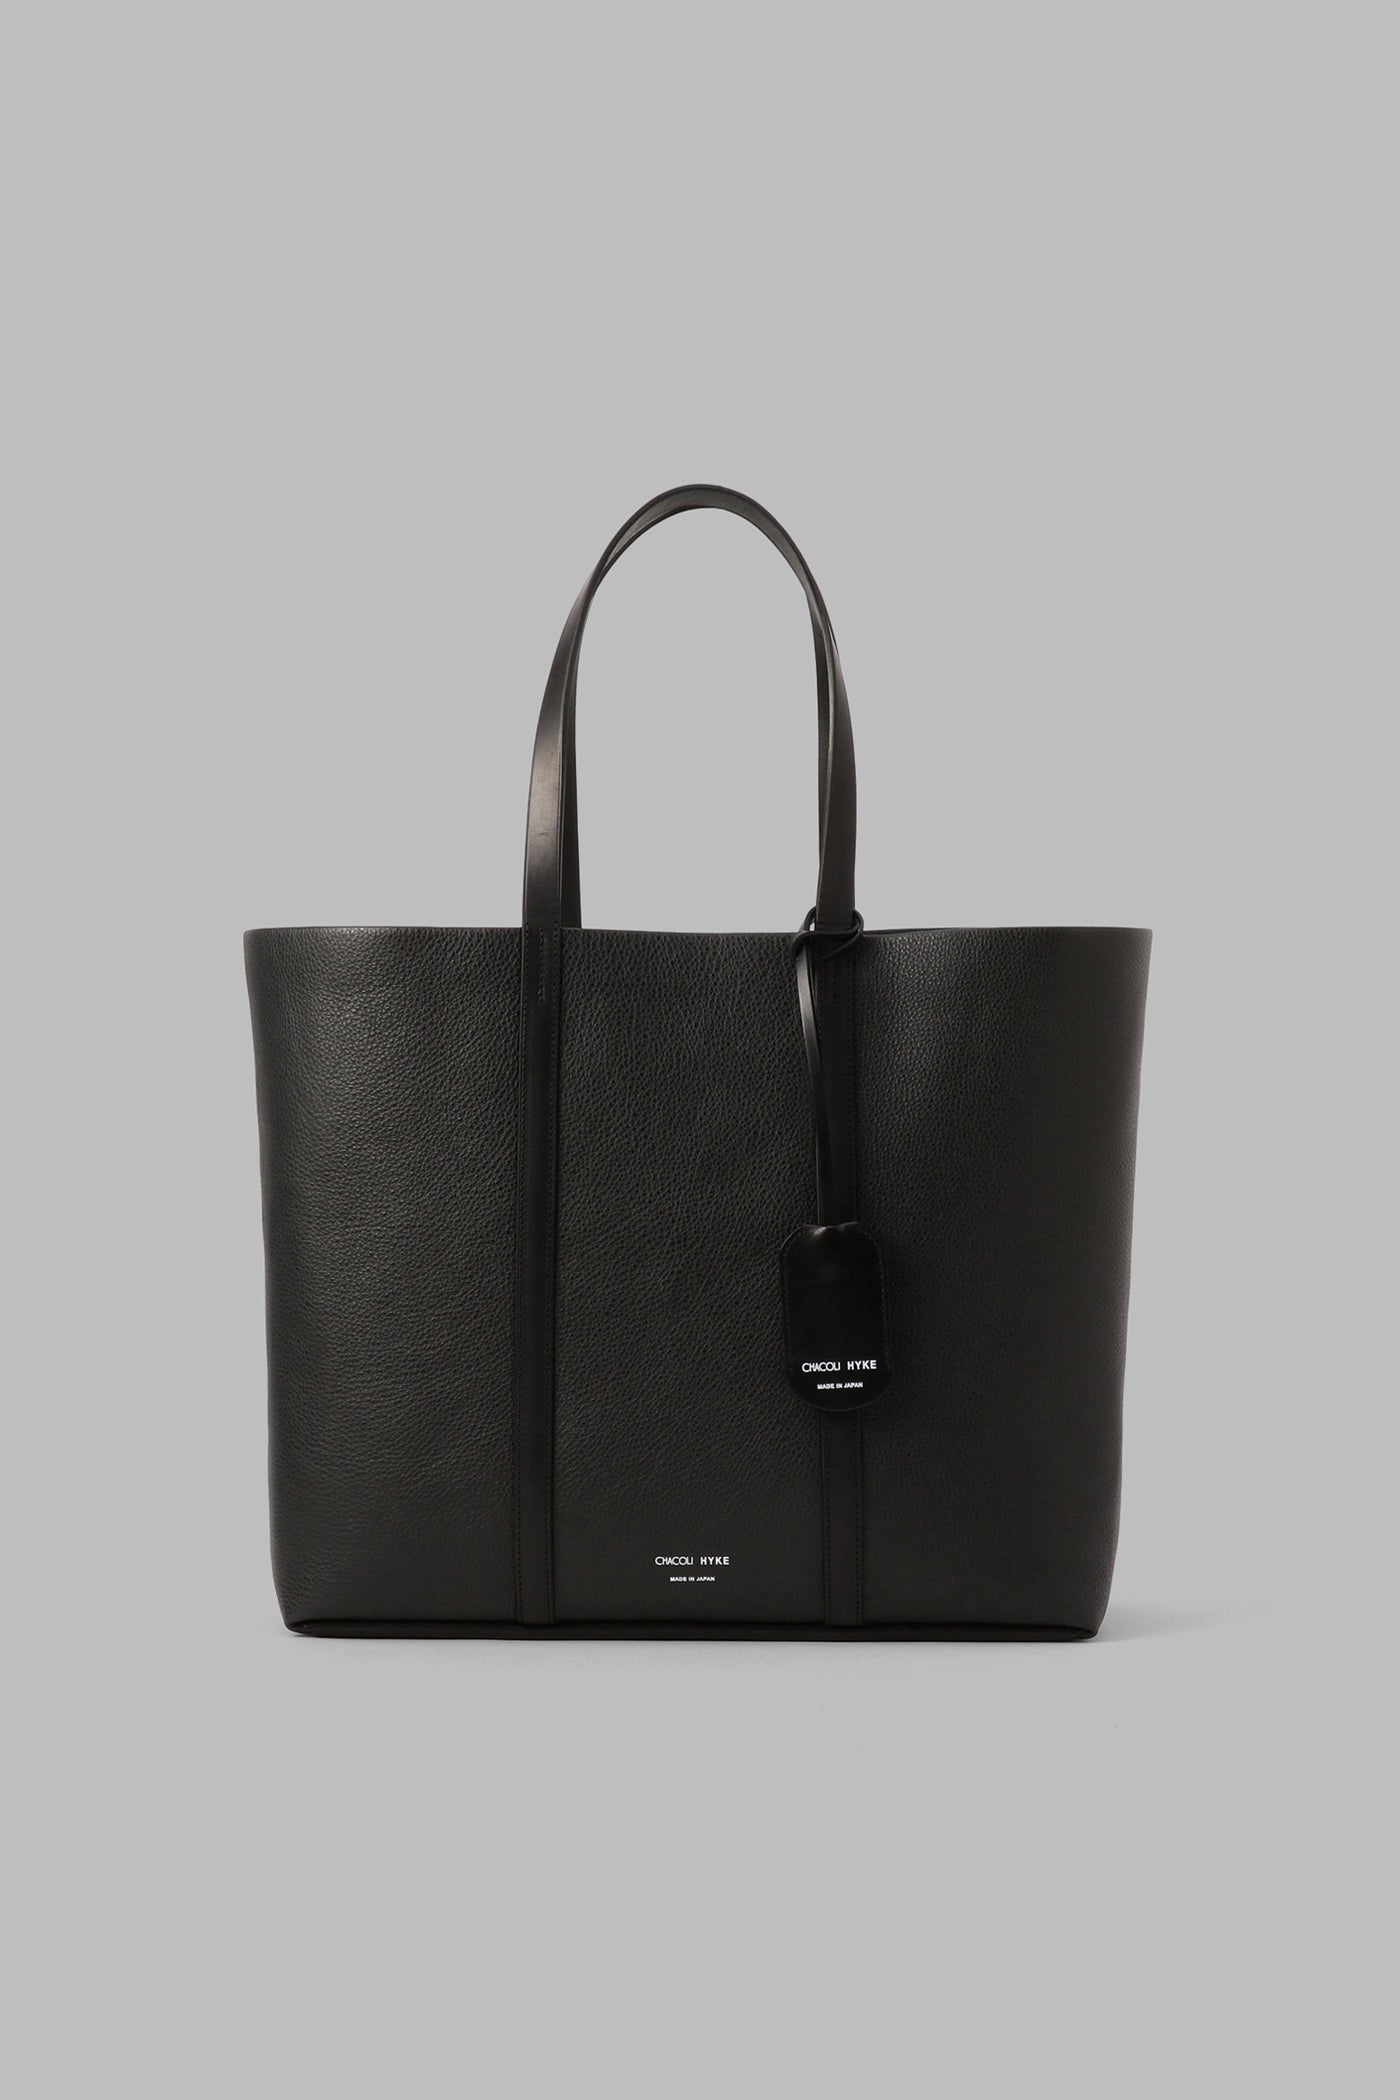 LEATHER TOTE BAG (MEDIUM SIZE)CHACOLI × HYKE – HYKE ONLINE STORE